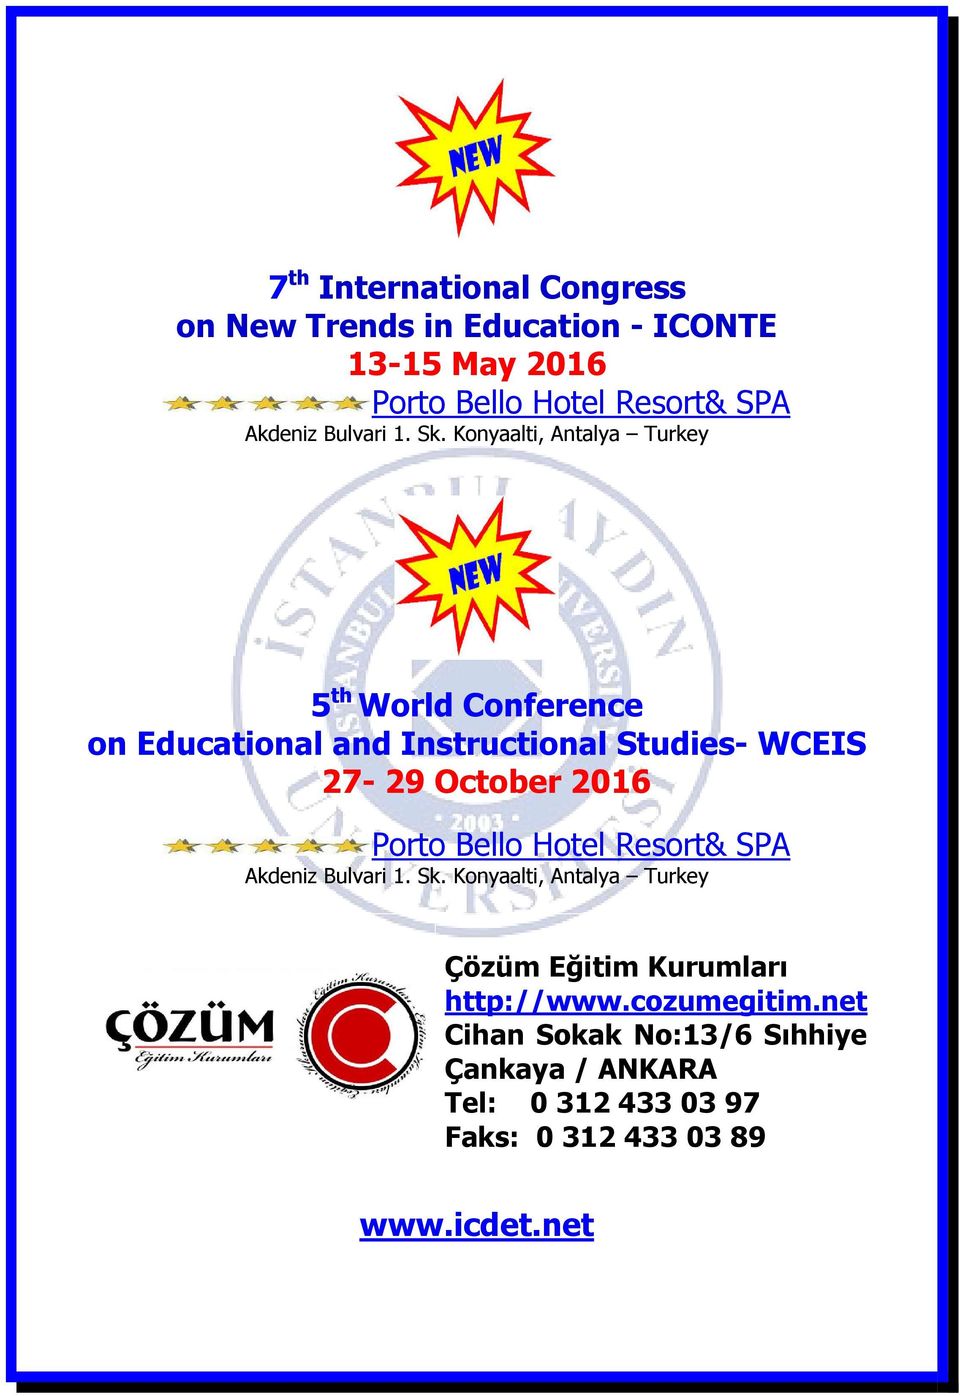 Konyaalti, Antalya Turkey 5 th World Conference on Educational and Instructional Studies- WCEIS 27-29 October 2016